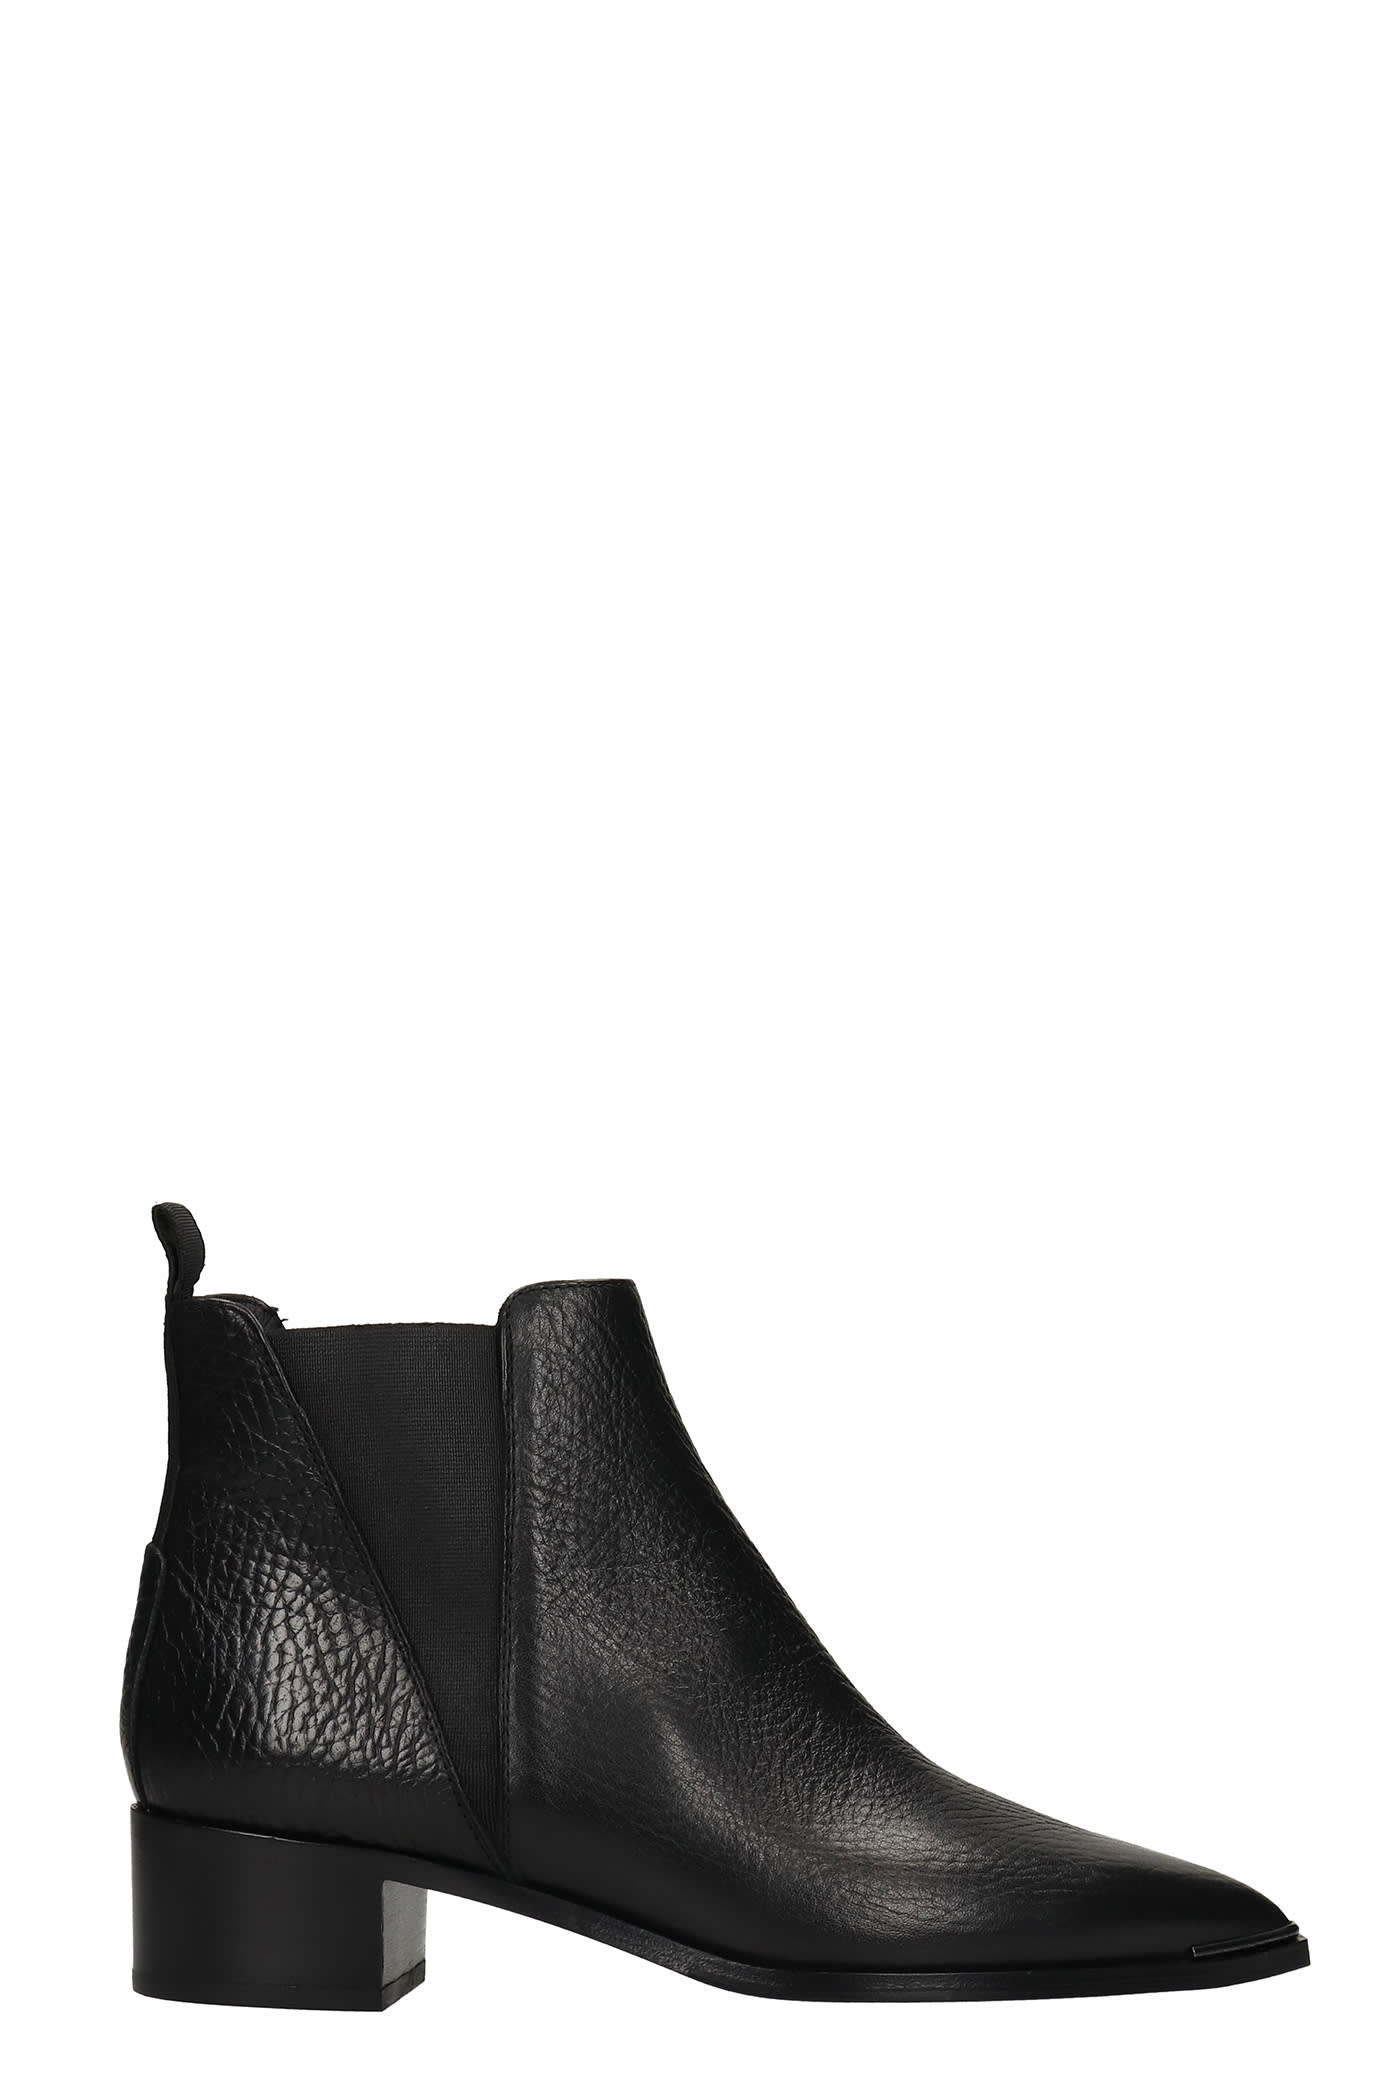 ACNE STUDIOS JENSEN LOW HEELS ANKLE BOOTS IN BLACK LEATHER,AD0269900